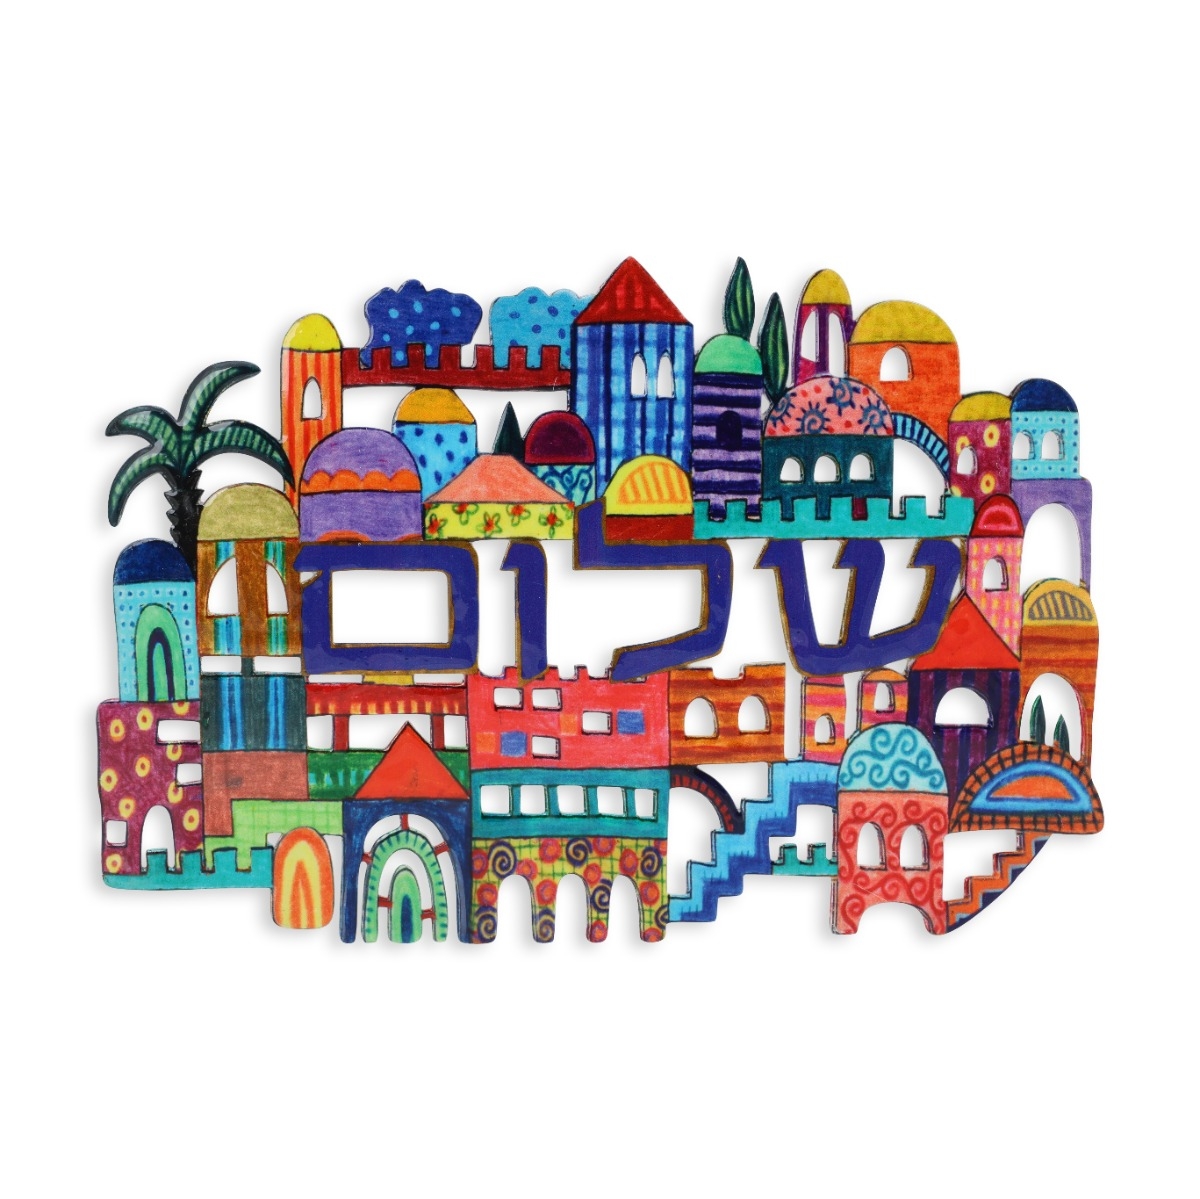 Shalom Wall Hanging With Jerusalem Design By Yair Emanuel - 1